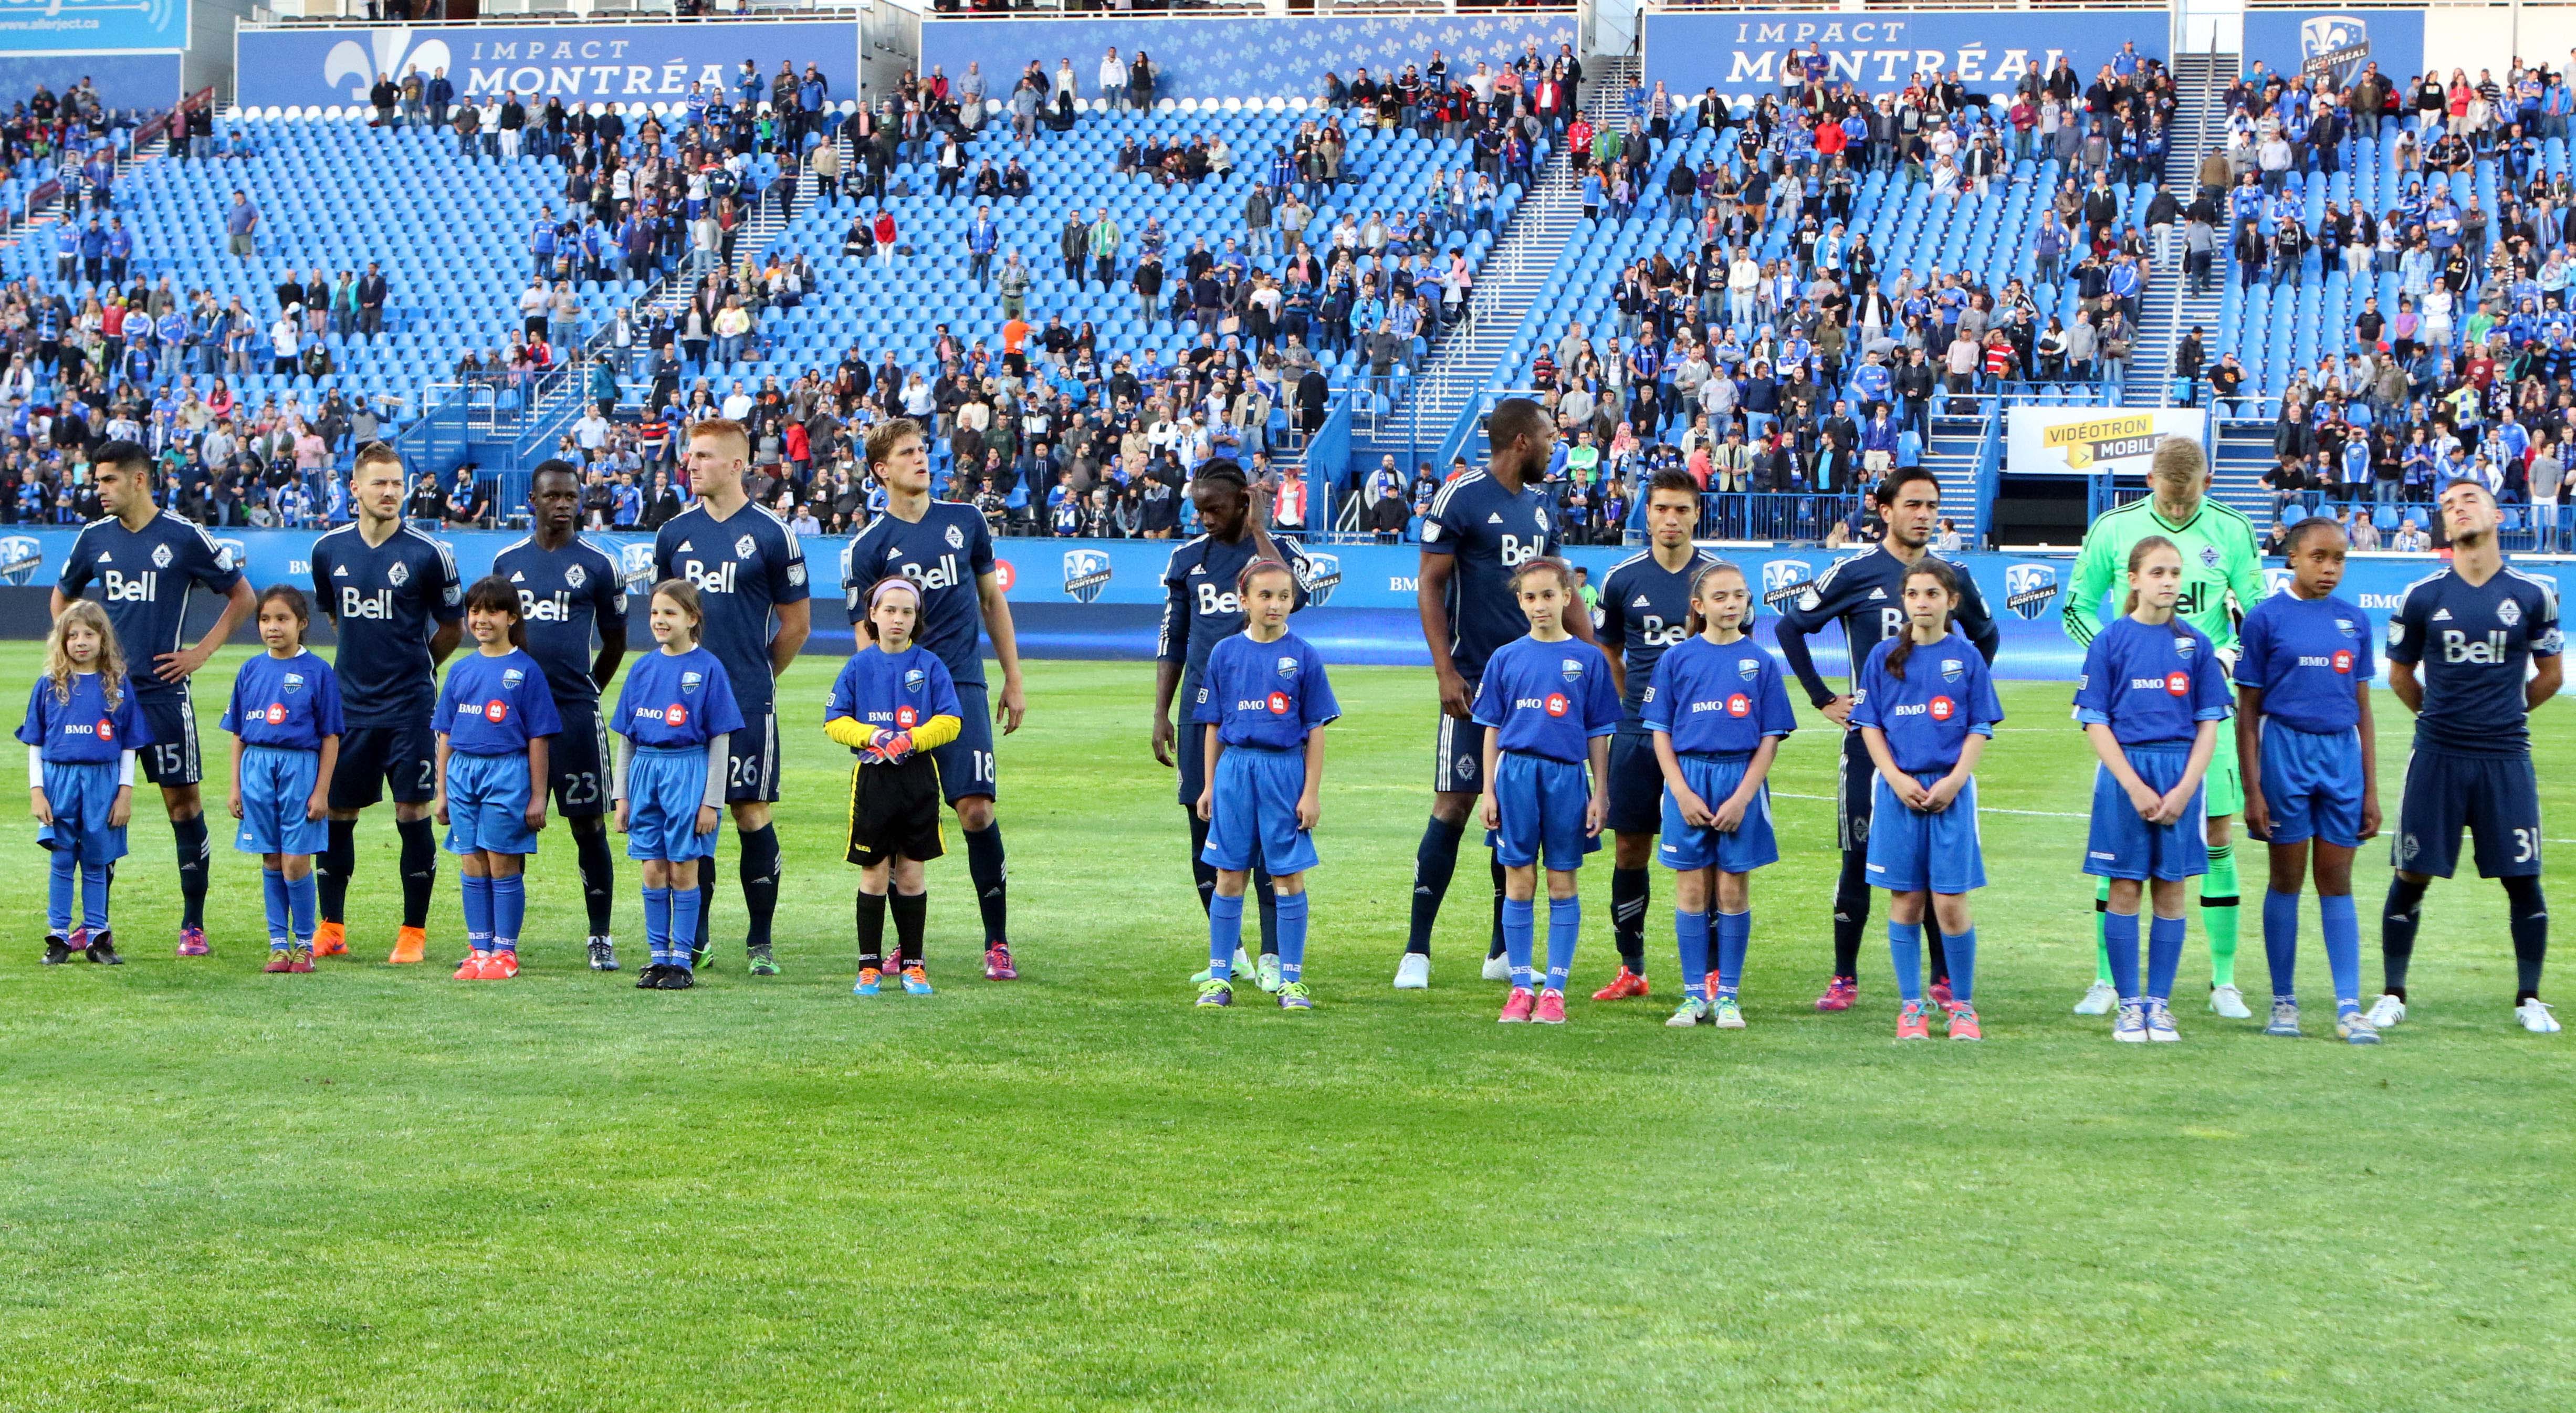 Jun 3, 2015; Montreal, Quebec, CAN; Vancouver FC players and youngsters stand up during the national anthems before the first half against Montreal Impact at Stade Saputo. Mandatory Credit: Jean-Yves Ahern-USA TODAY Sports